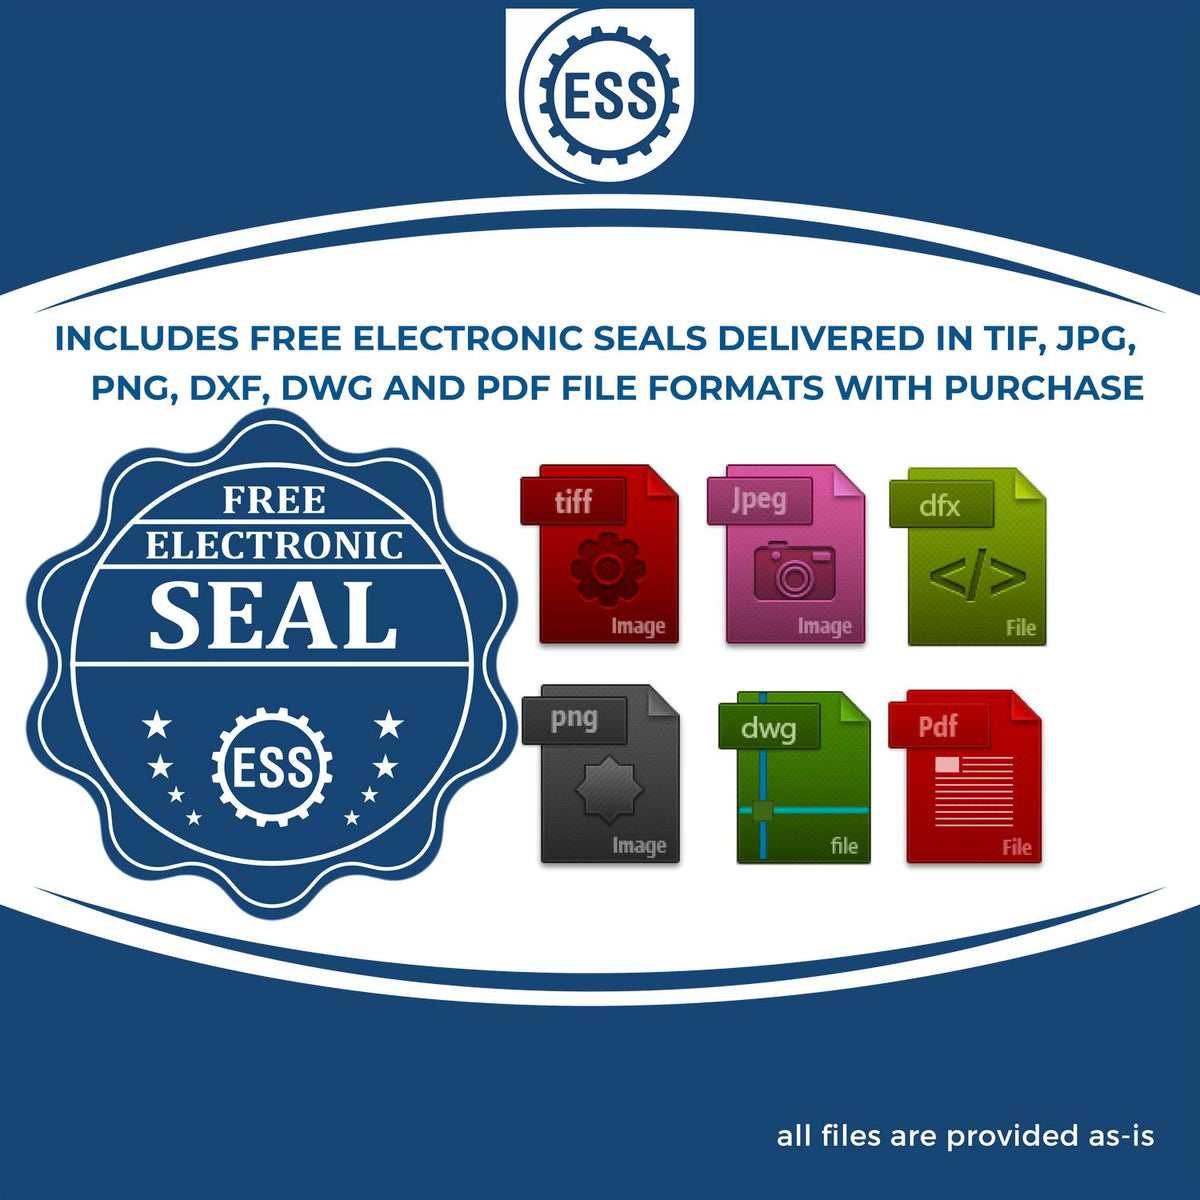 An infographic for the free electronic seal for the State of North Carolina Extended Long Reach Engineer Seal illustrating the different file type icons such as DXF, DWG, TIF, JPG and PNG.